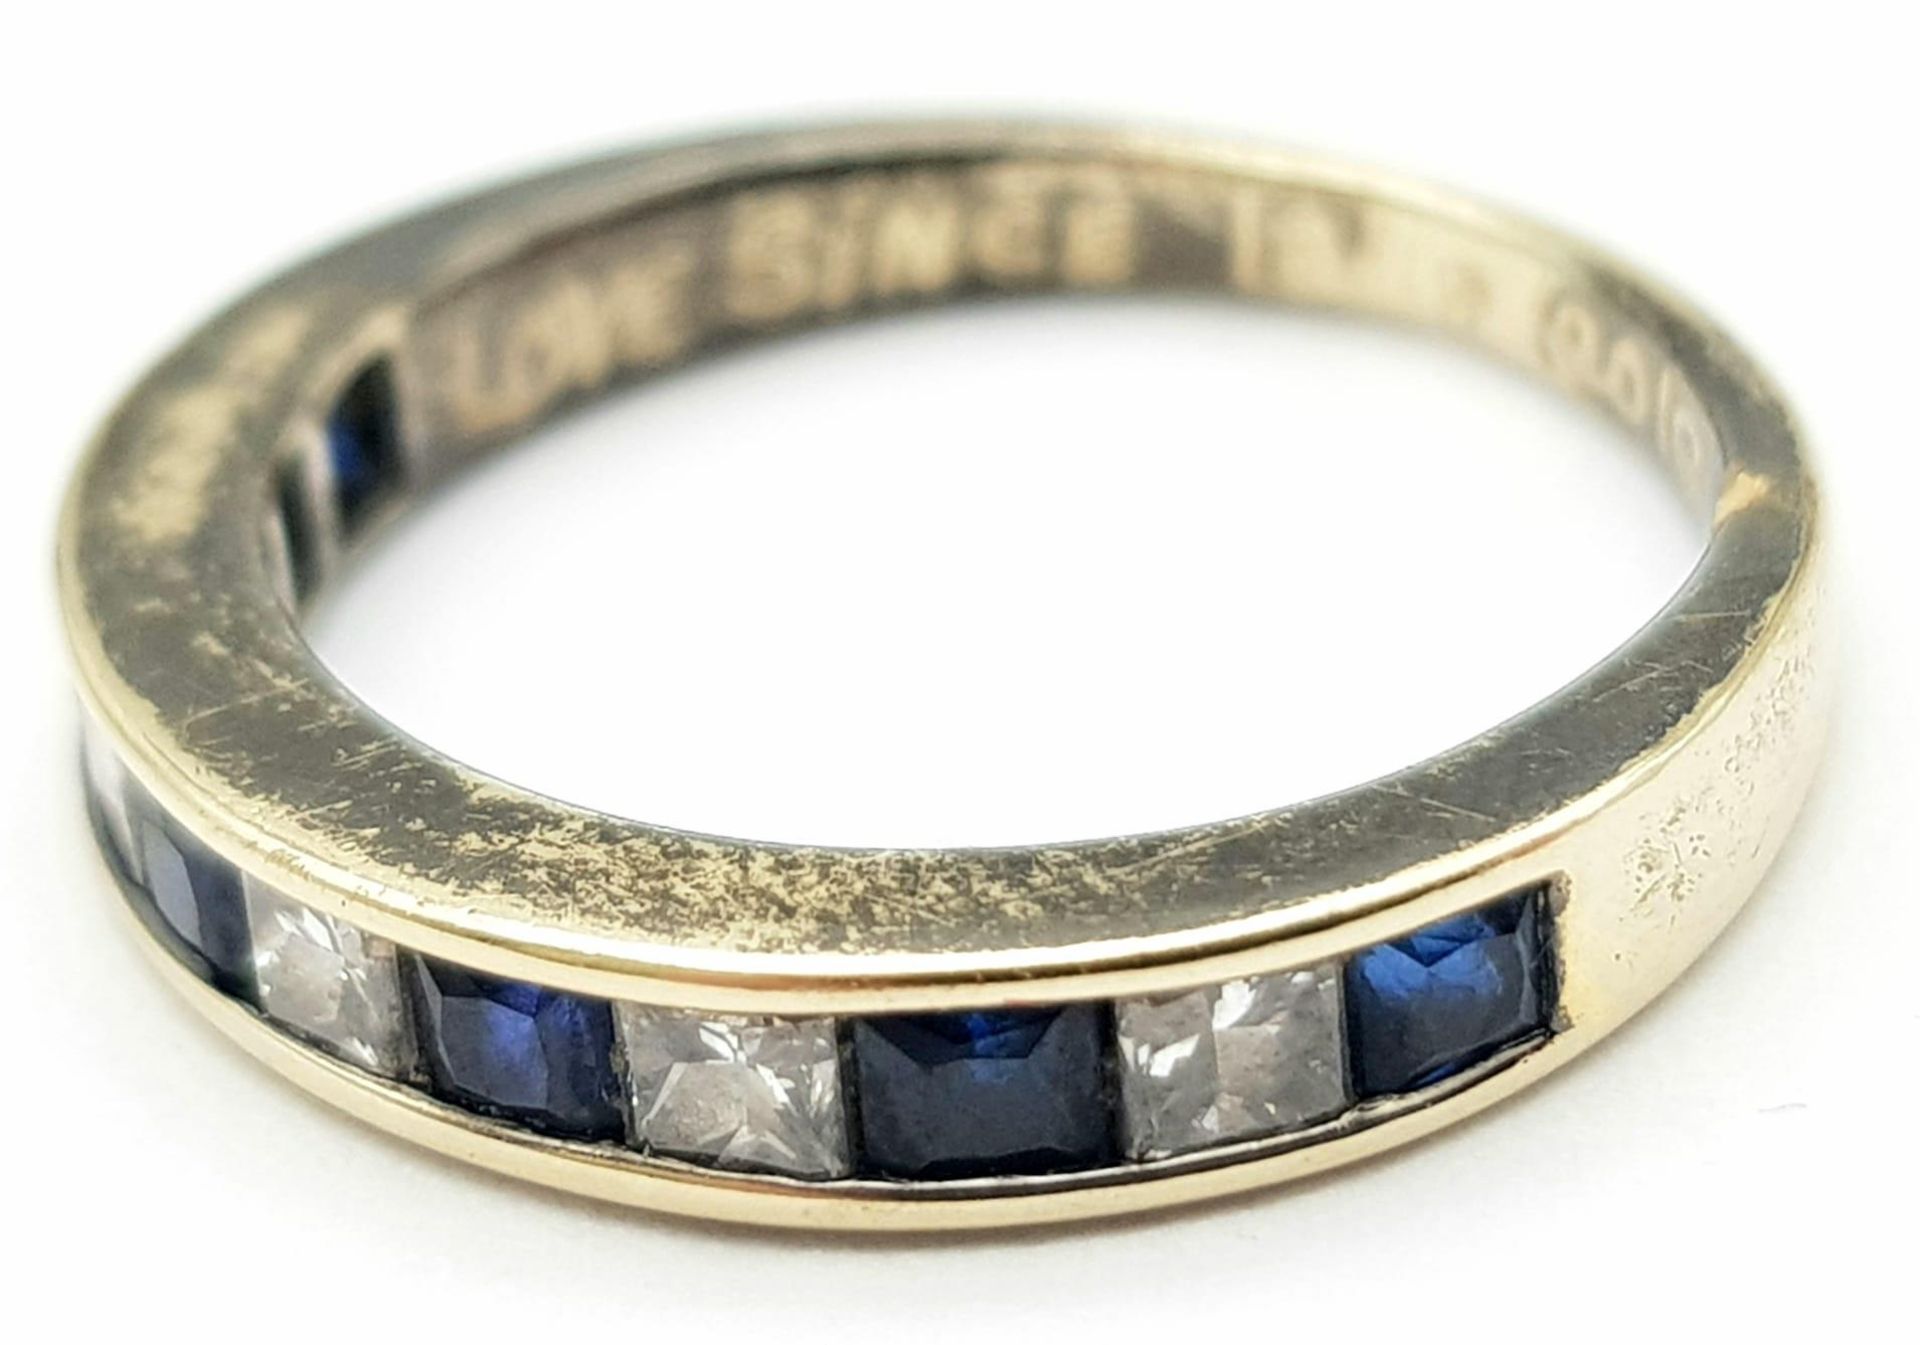 An 18K Gold Diamond and Sapphire Half-Eternity Ring. Size K. 3.1g total weight. Ref: 016637 - Image 3 of 5